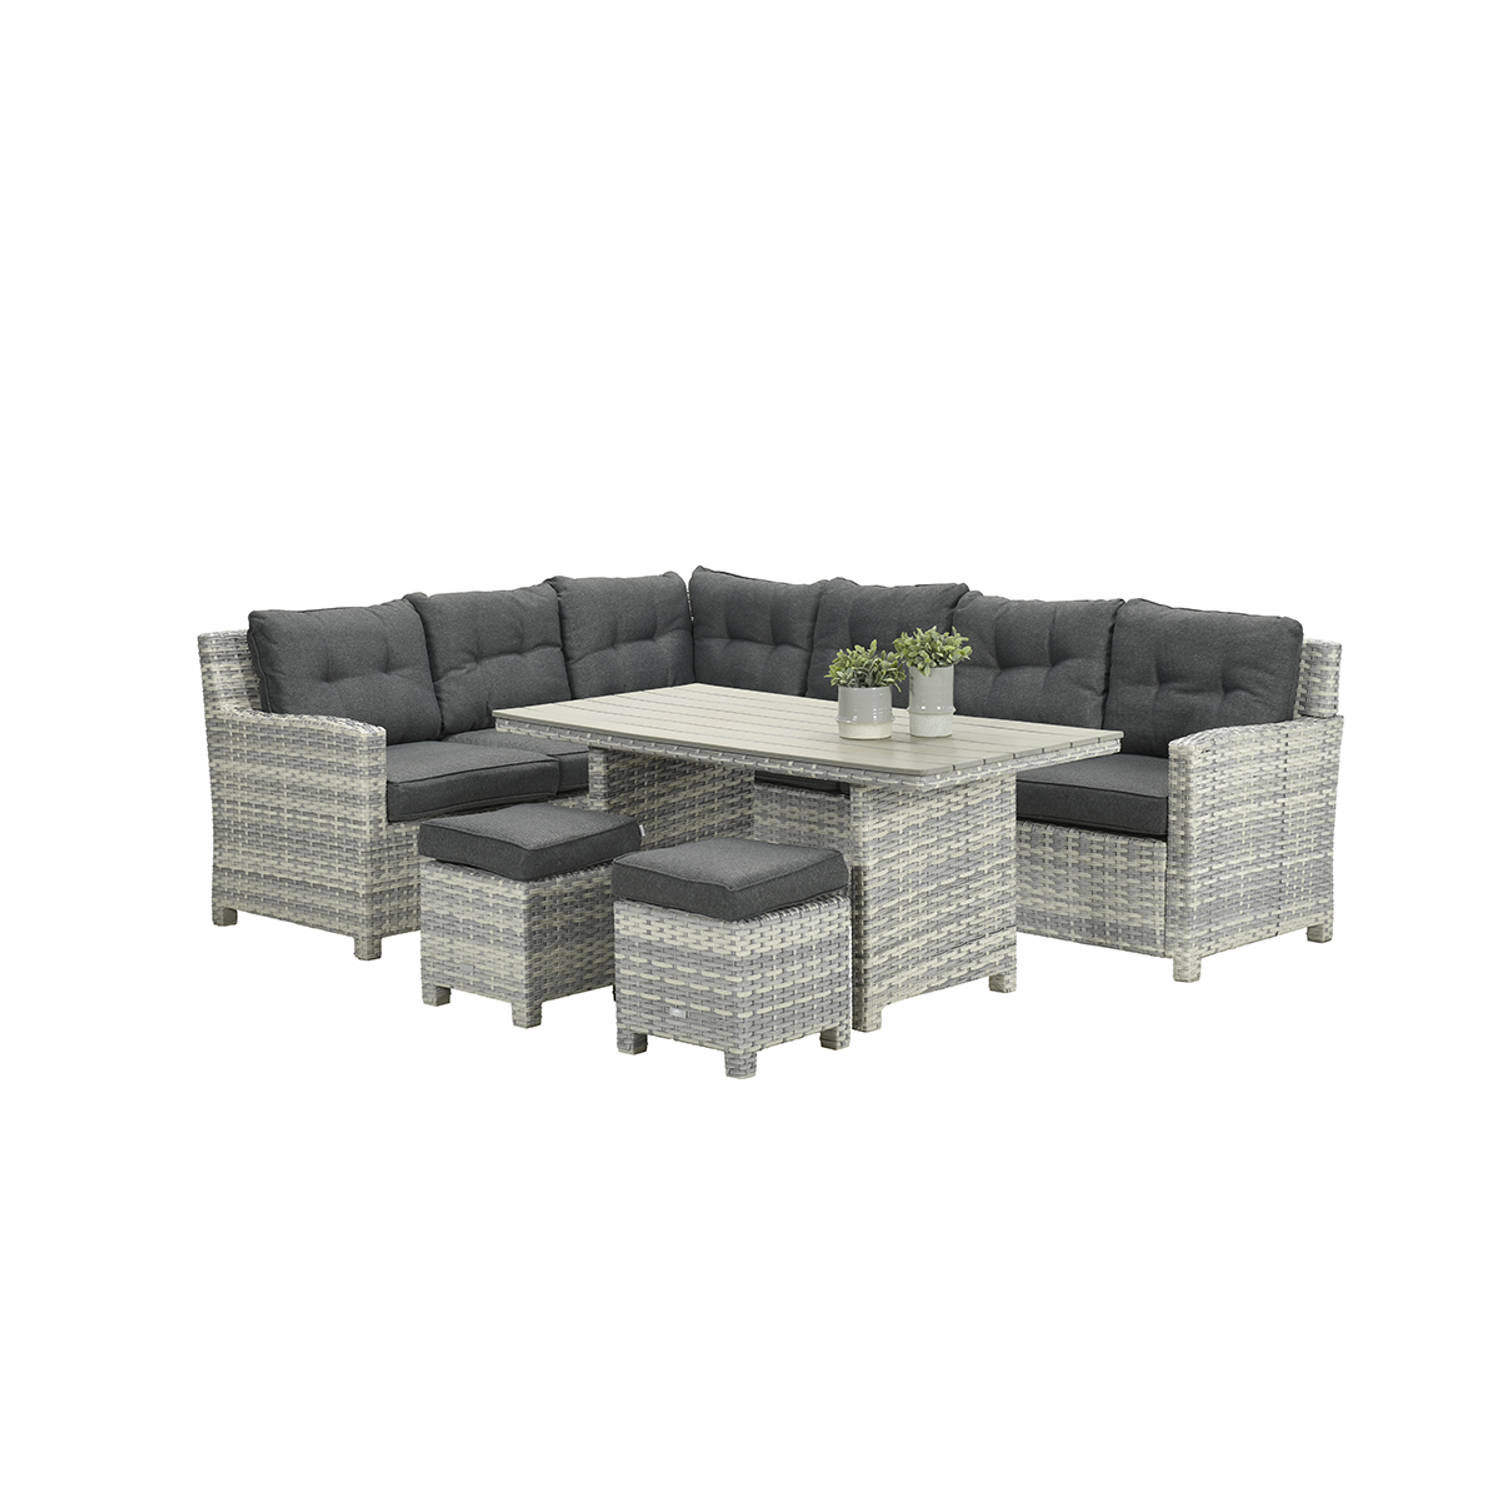 Garden Impressions Seagull lounge dining set links cloudy grey